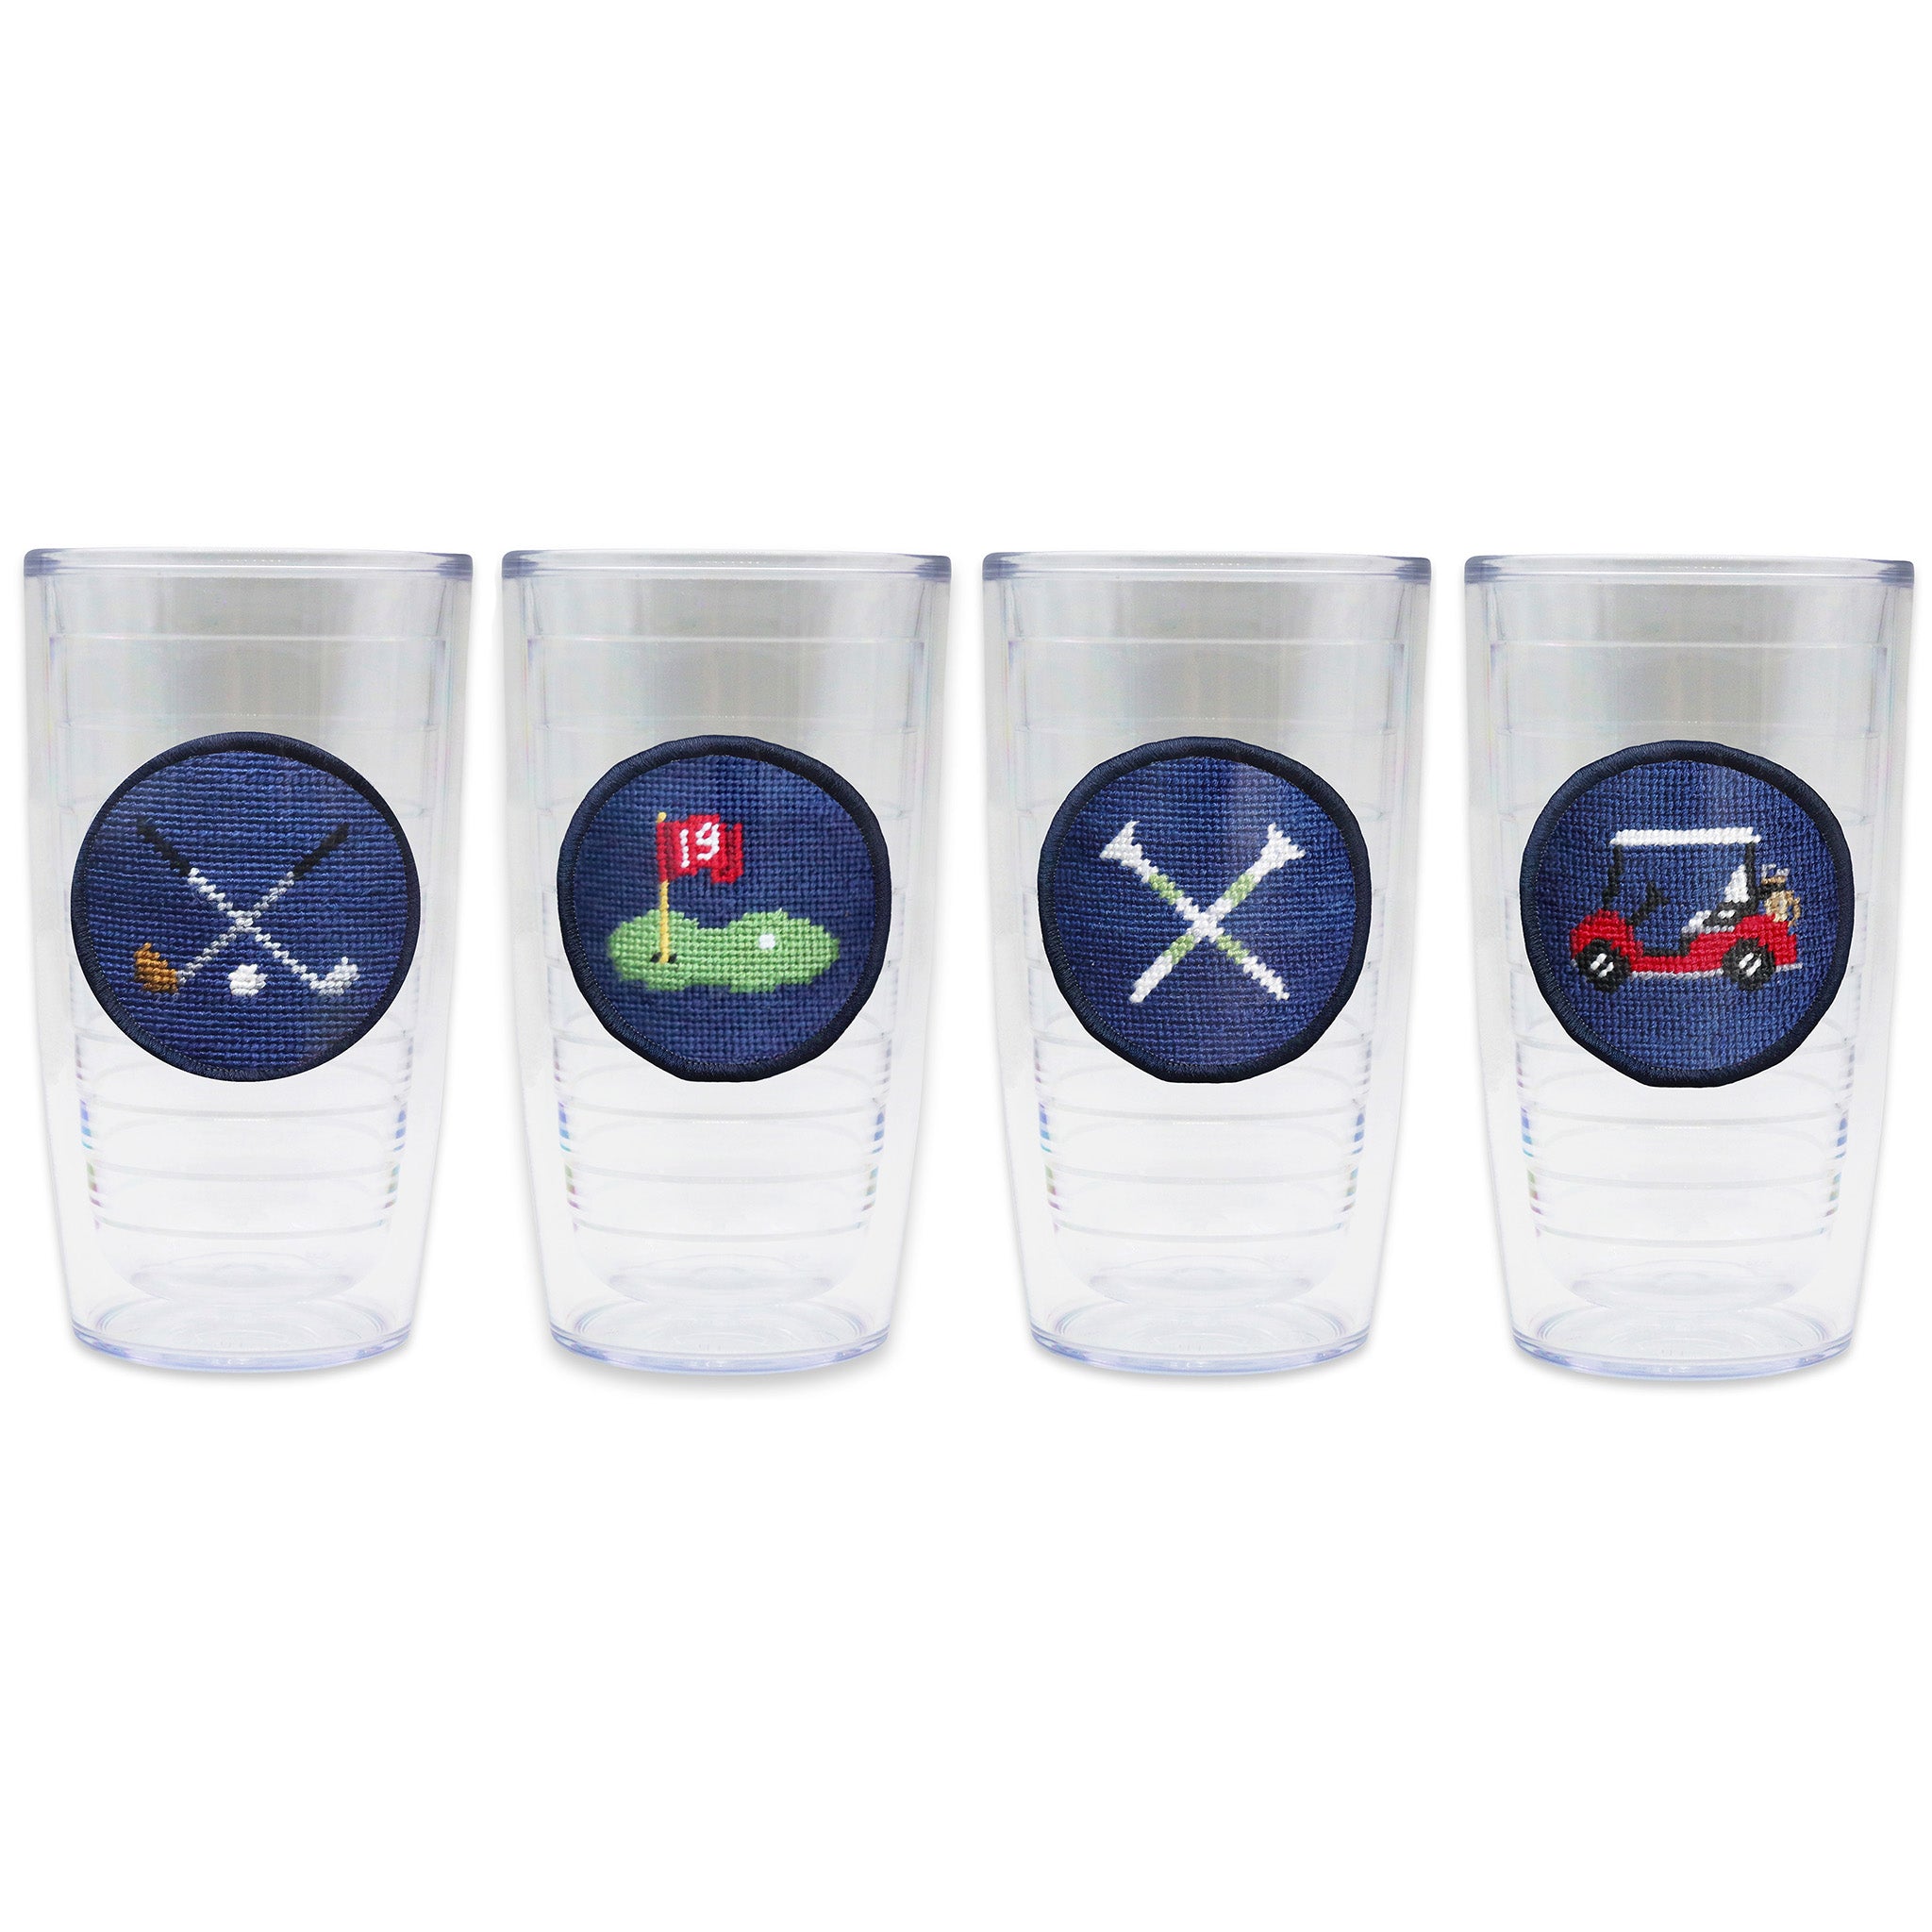 Crossed Clubs Tervis Tumbler (Classic Navy)